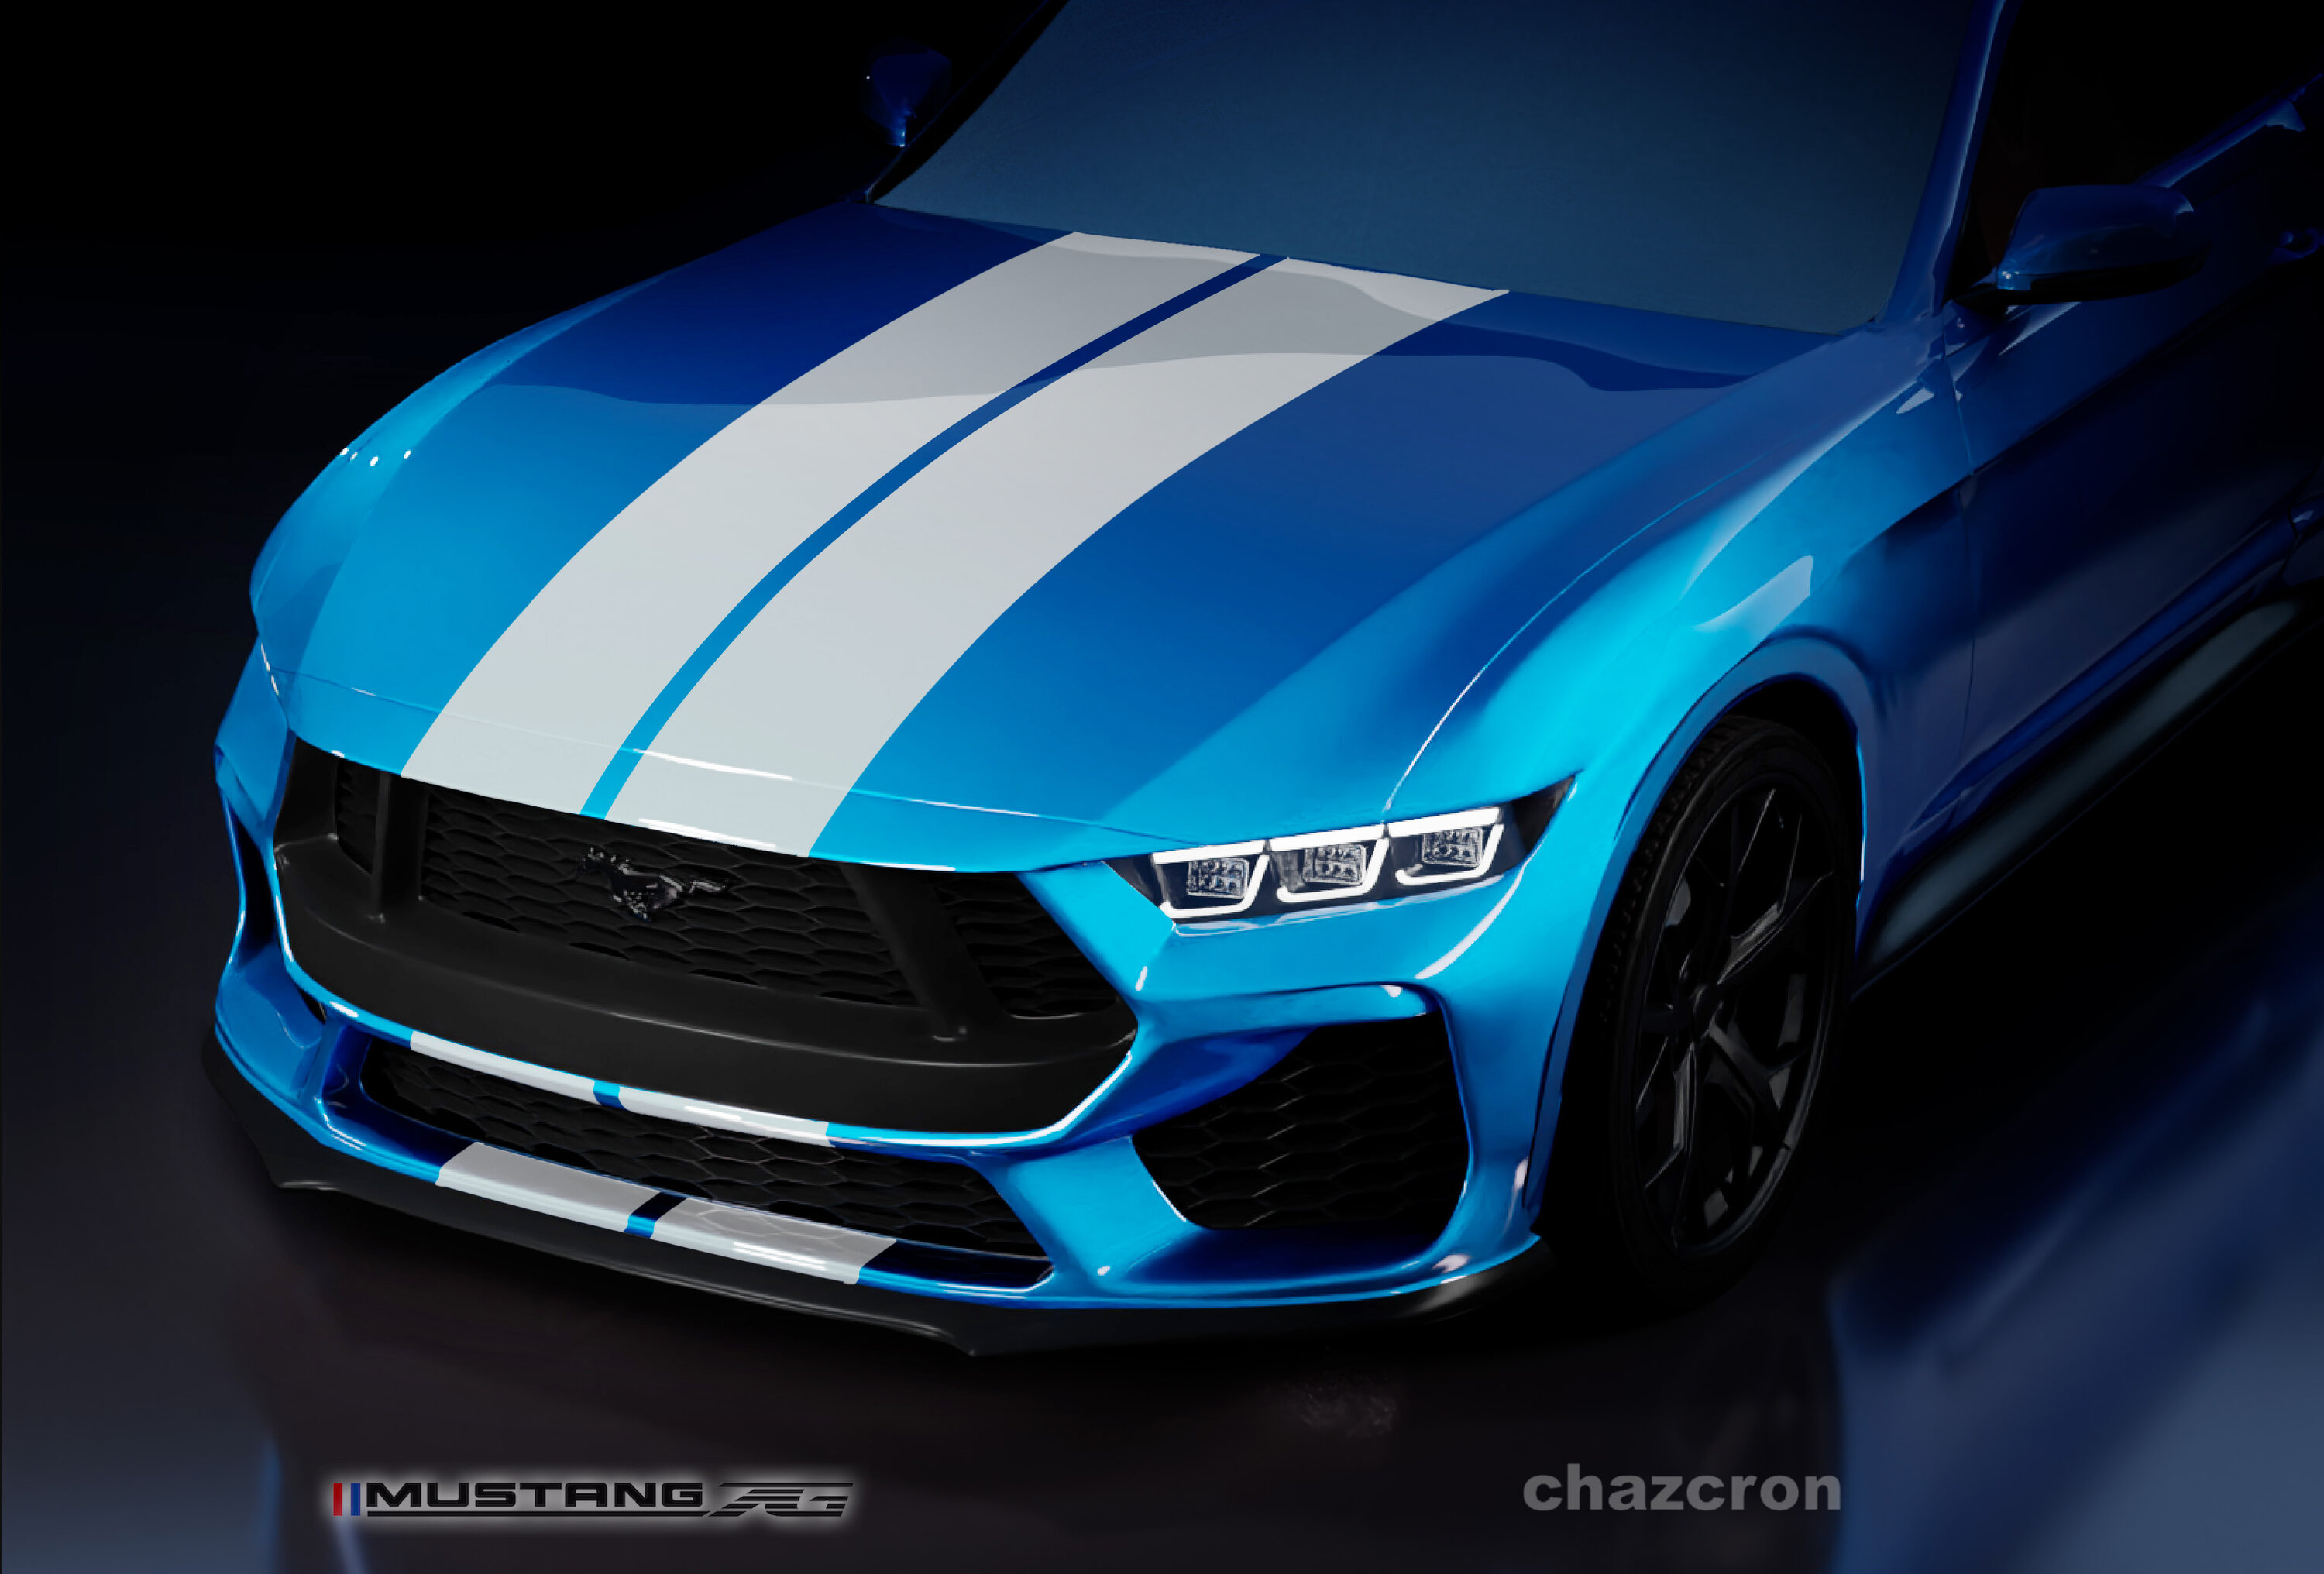 S650 Mustang chazcron weighs in... 7th gen 2023 Mustang S650 3D model & renderings in several colors! GB_W